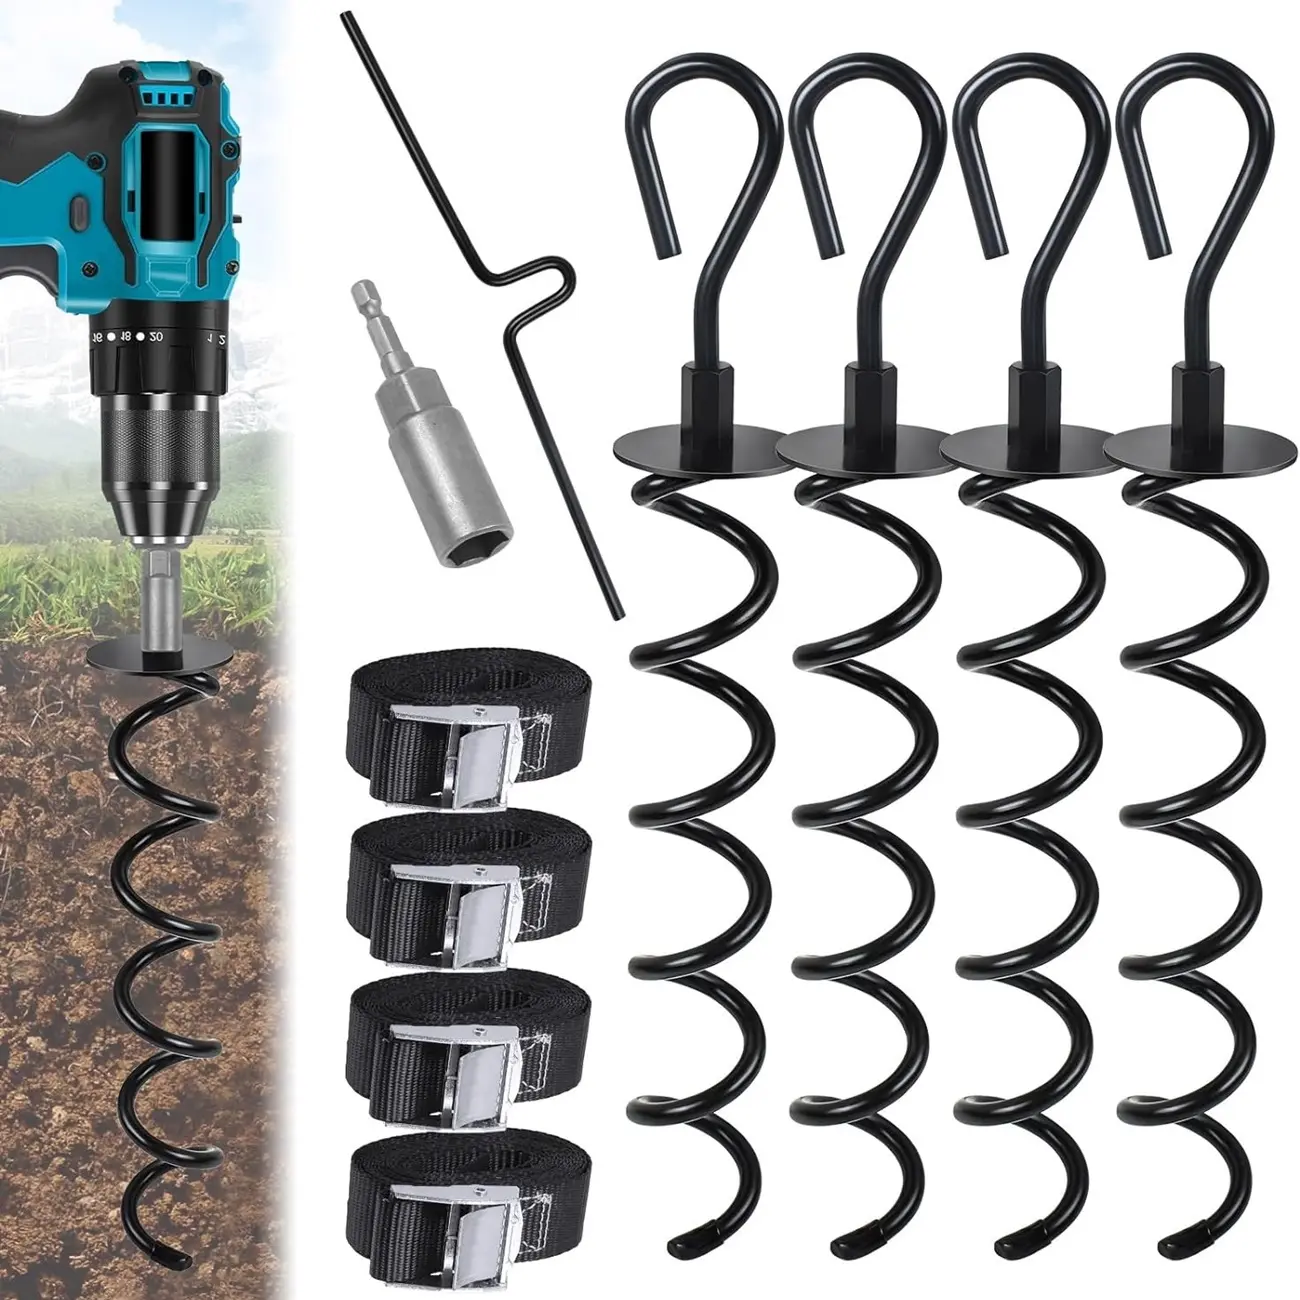 Spiral Ground Anchors Kit Heavy Duty Screw in Earth Anchors With Crow Bar